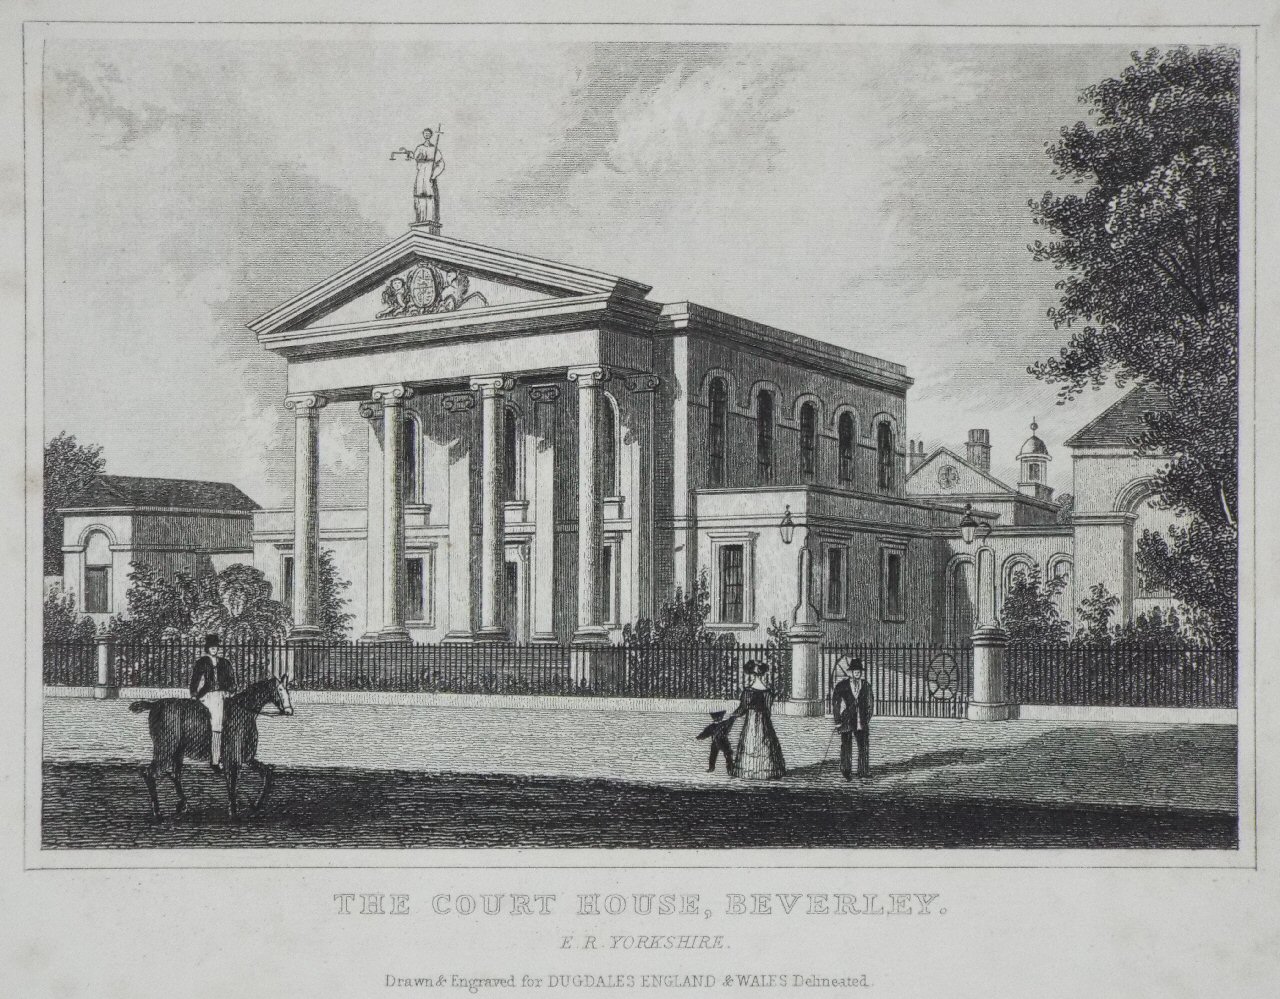 Print - The Court House, Beverley. E. R. Yorkshire.